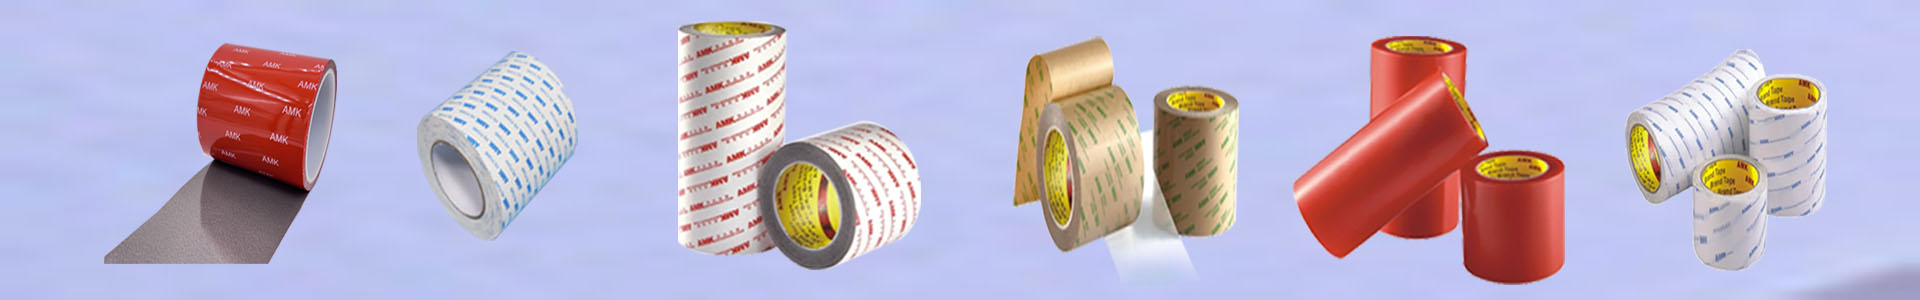 AMK Tape Manufacturer - Catalogs and Brochures of Adhesive Tapes